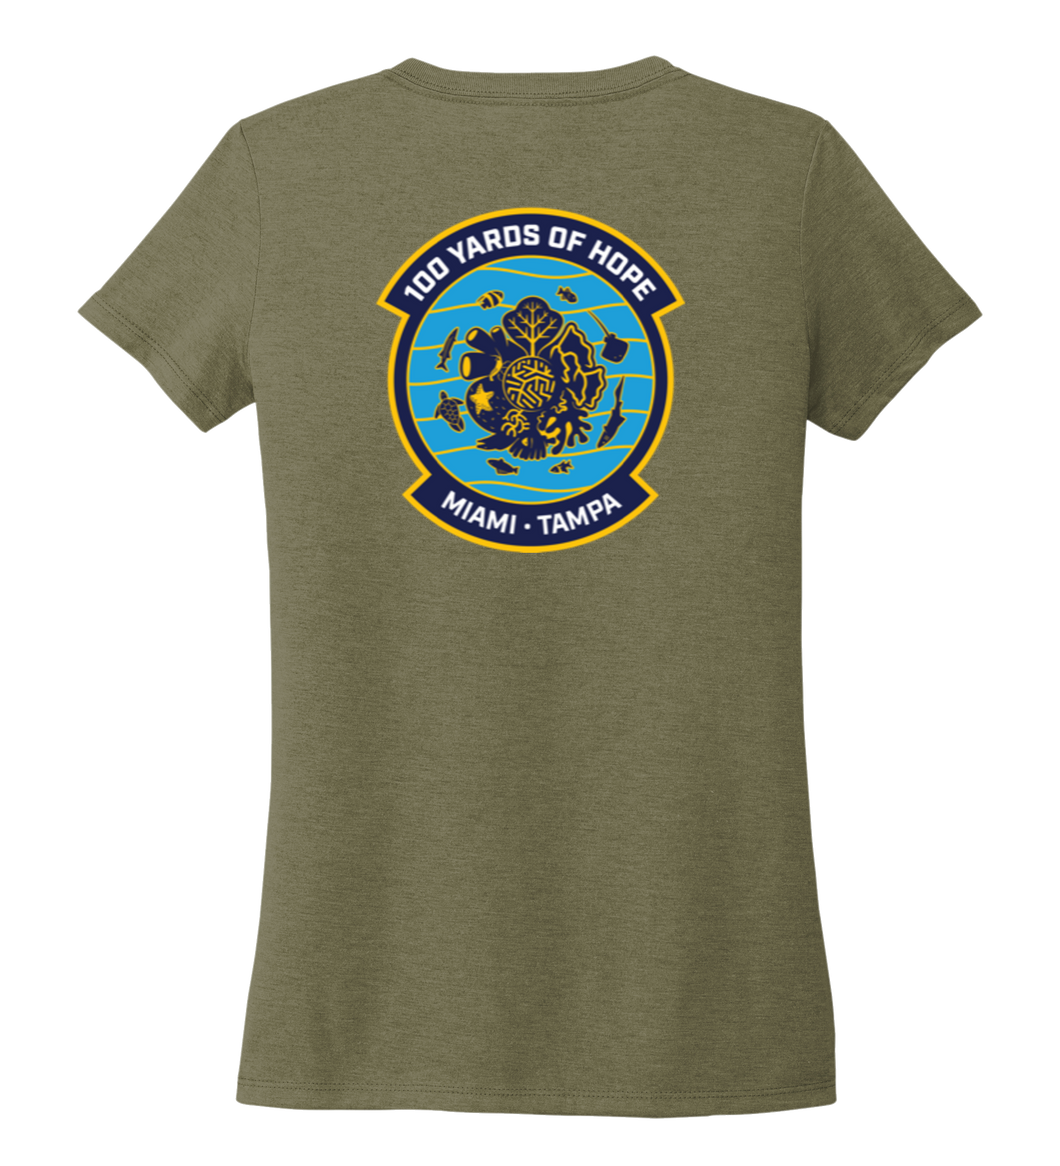 FORCE BLUE 100 YARDS OF HOPE Women's V-neck T-shirt in Earthy Green